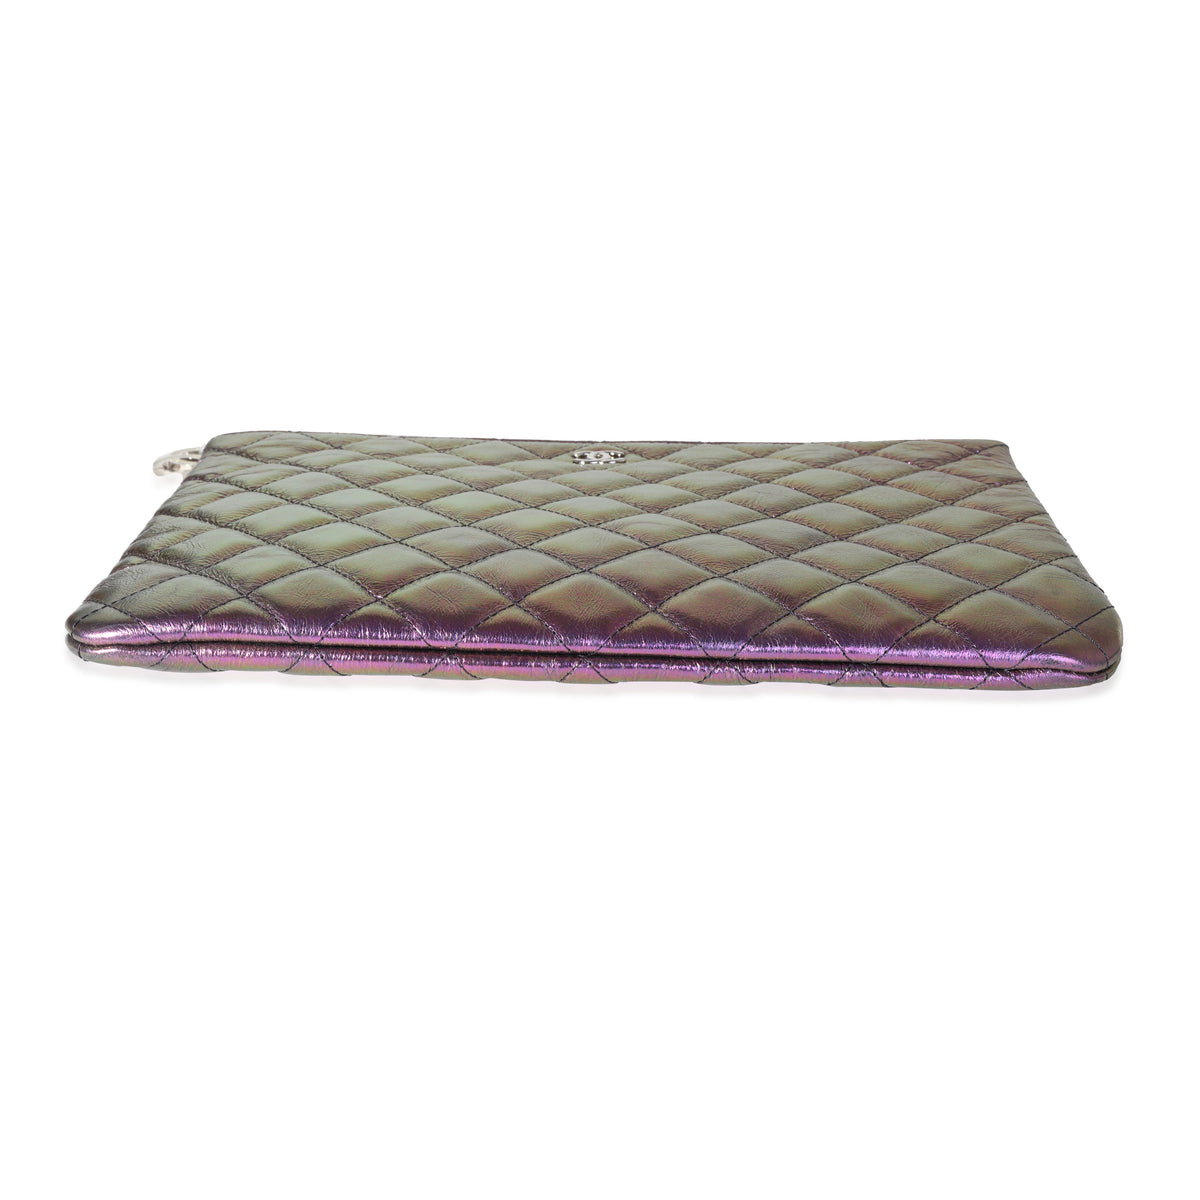 Chanel Iridescent Purple Quilted Calfskin O Case